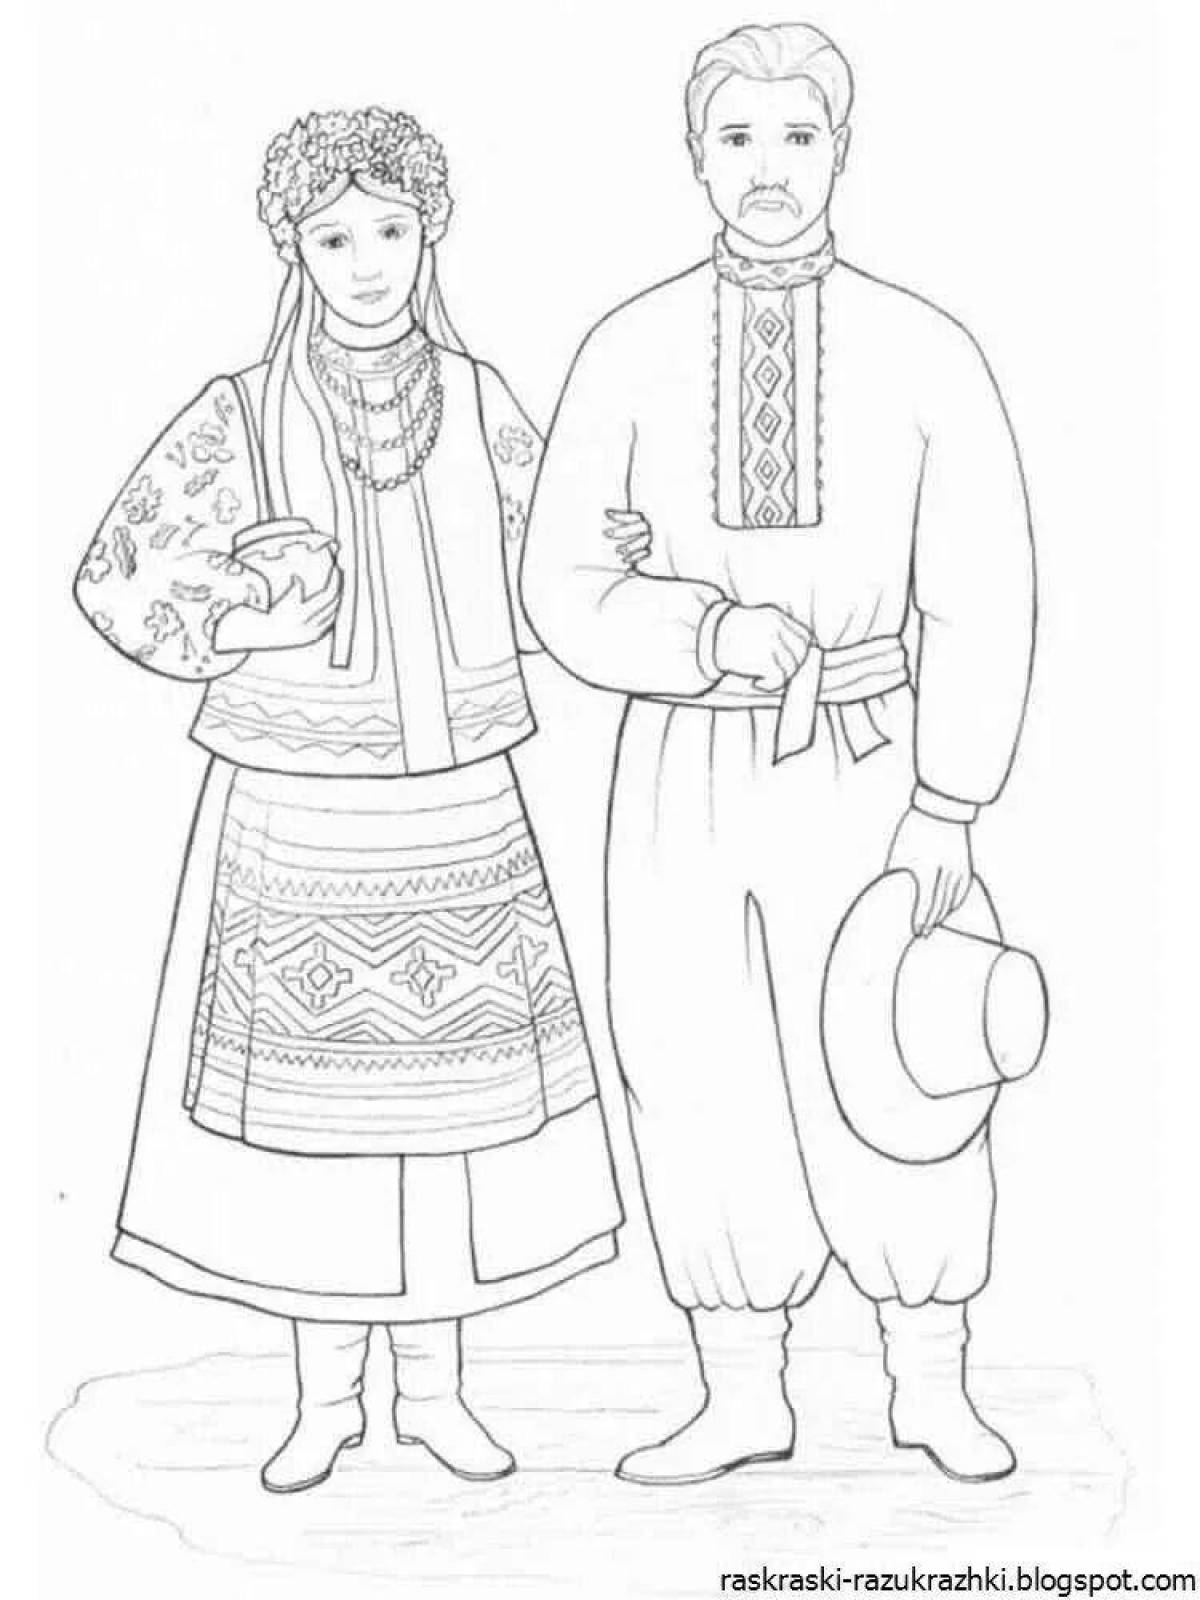 Dazzling Russian folk coloring book for kids